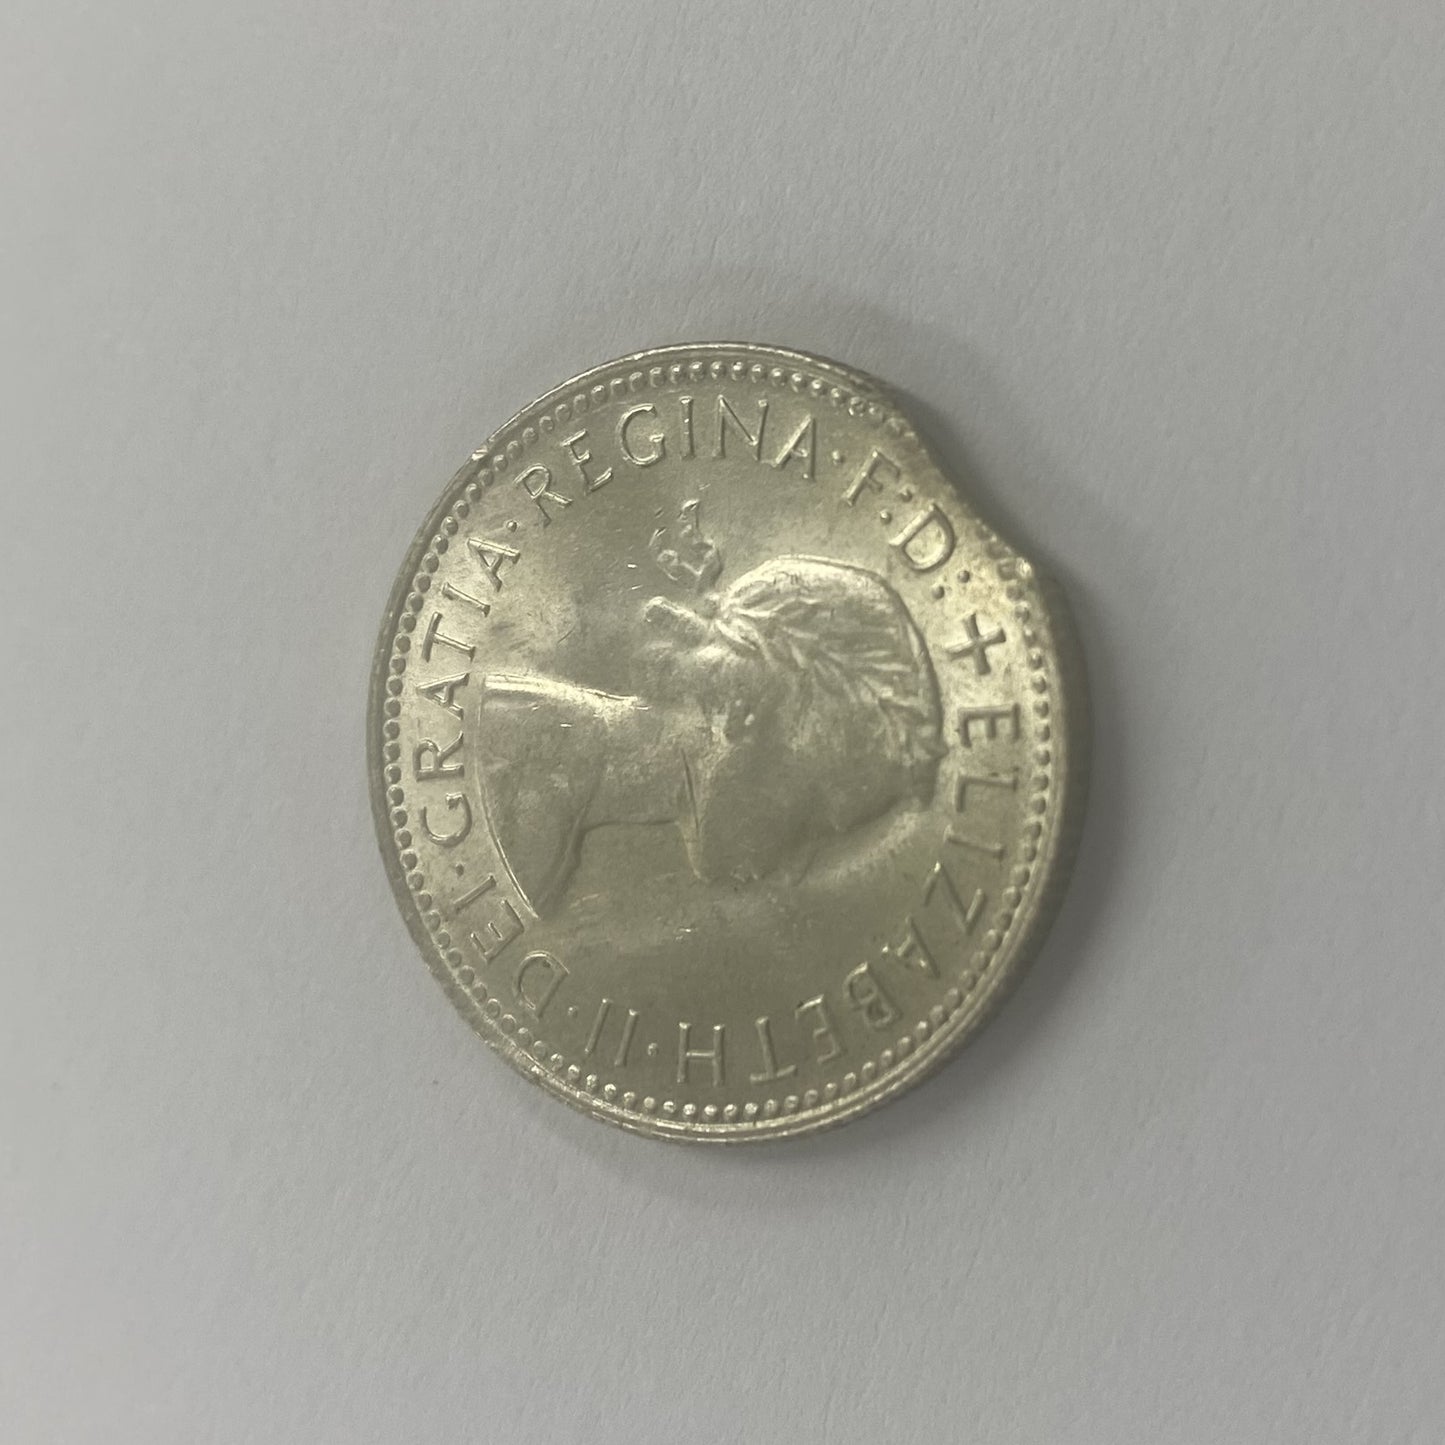 1962 Shilling - CLIPPED - Almost Uncirculated